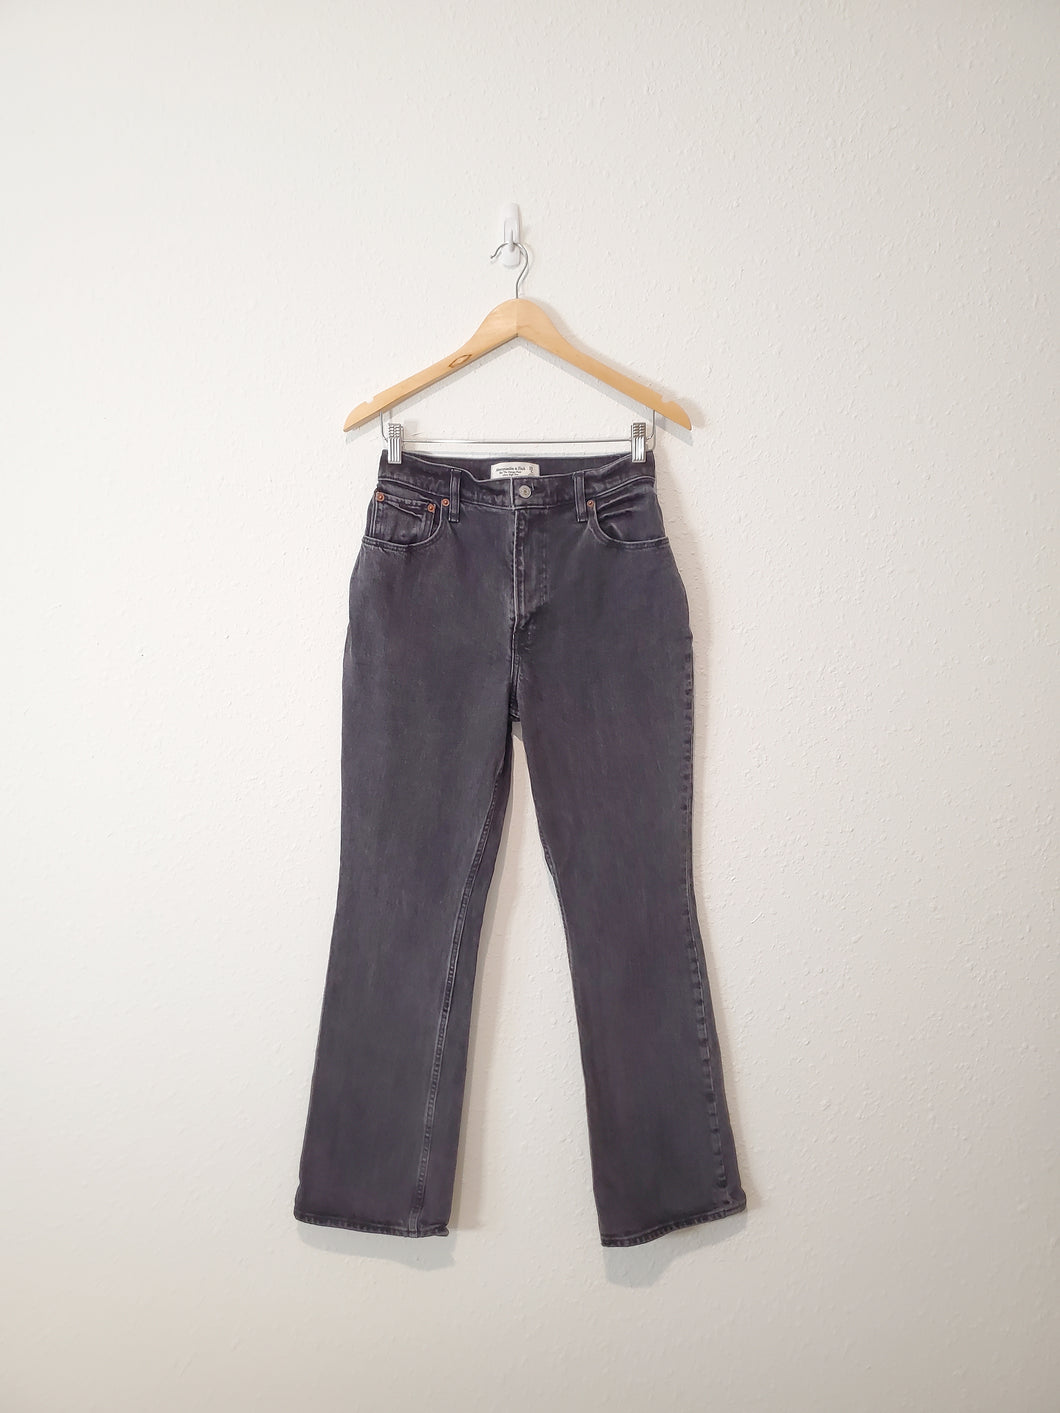 A&F 70s Vintage Flare Jeans (28/6 short)